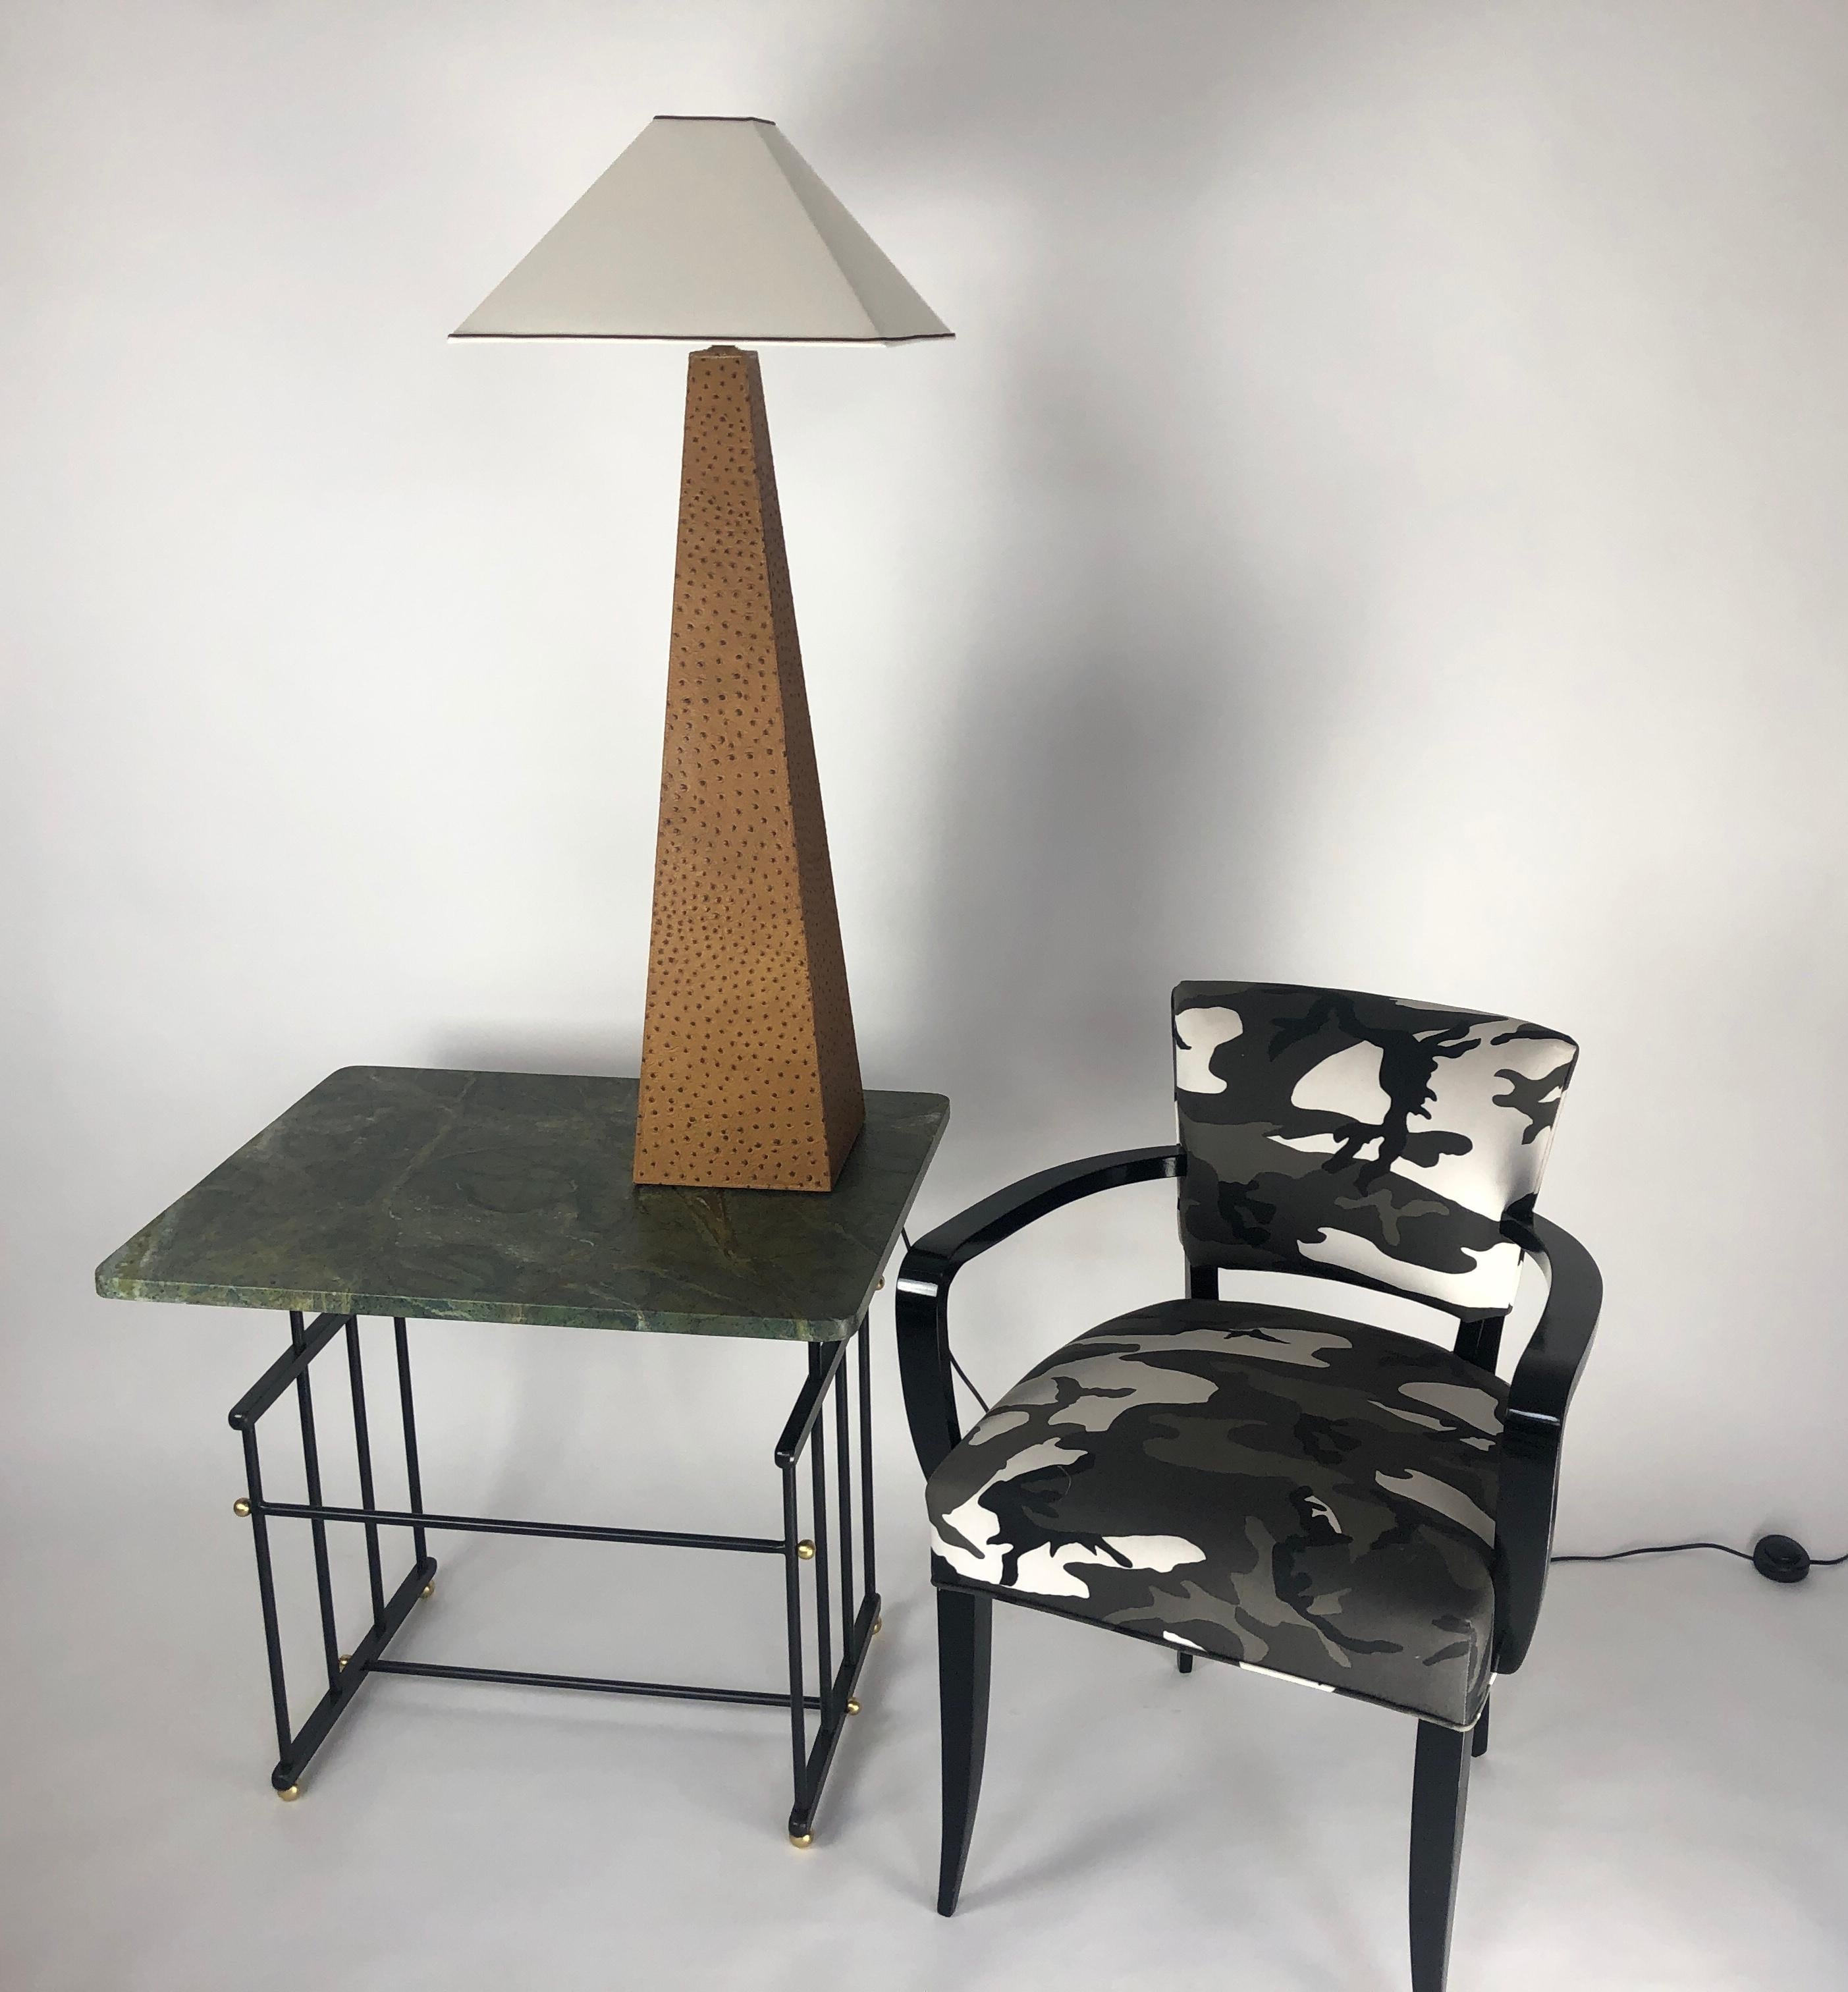 Two obelisk shaped lamps. They are covered in an embossed camel colored ostrich leather. The lamps have a new linen covered shade. The large scale lamps are very impressive in size. The light has one medium based bulb socket.  Lamps are in our NYC